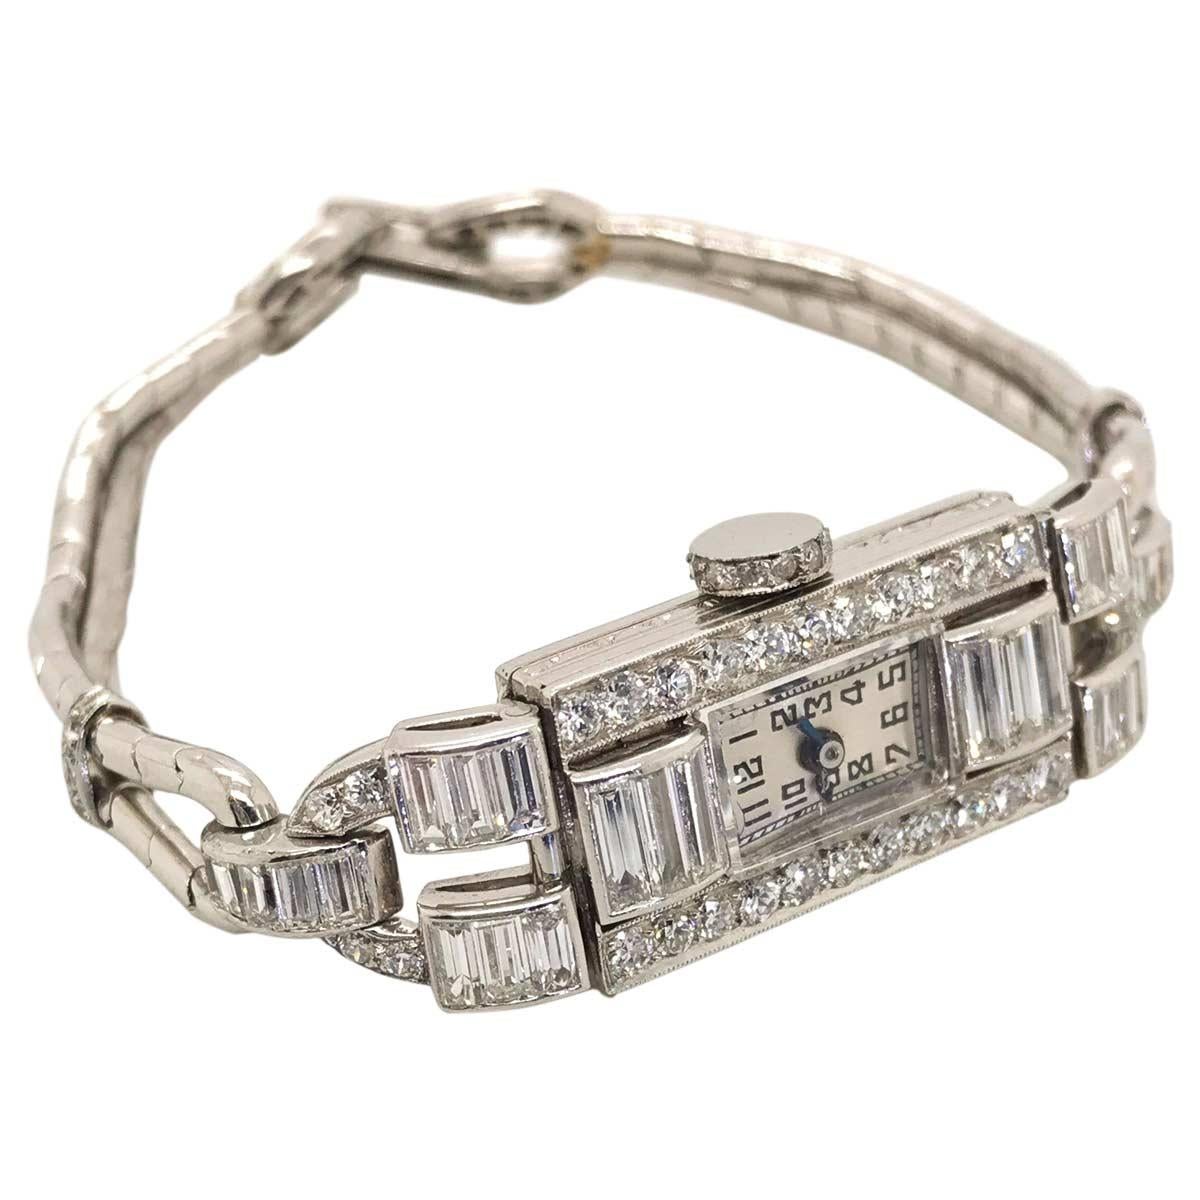 Imagine the 1920's, beaded flapper dresses, glittering headbands, multiple Deco diamond bracelets on one wrist and of course a fabulously stylish cocktail watch on the other. This one fits the bill perfectly, an original with the most stunning